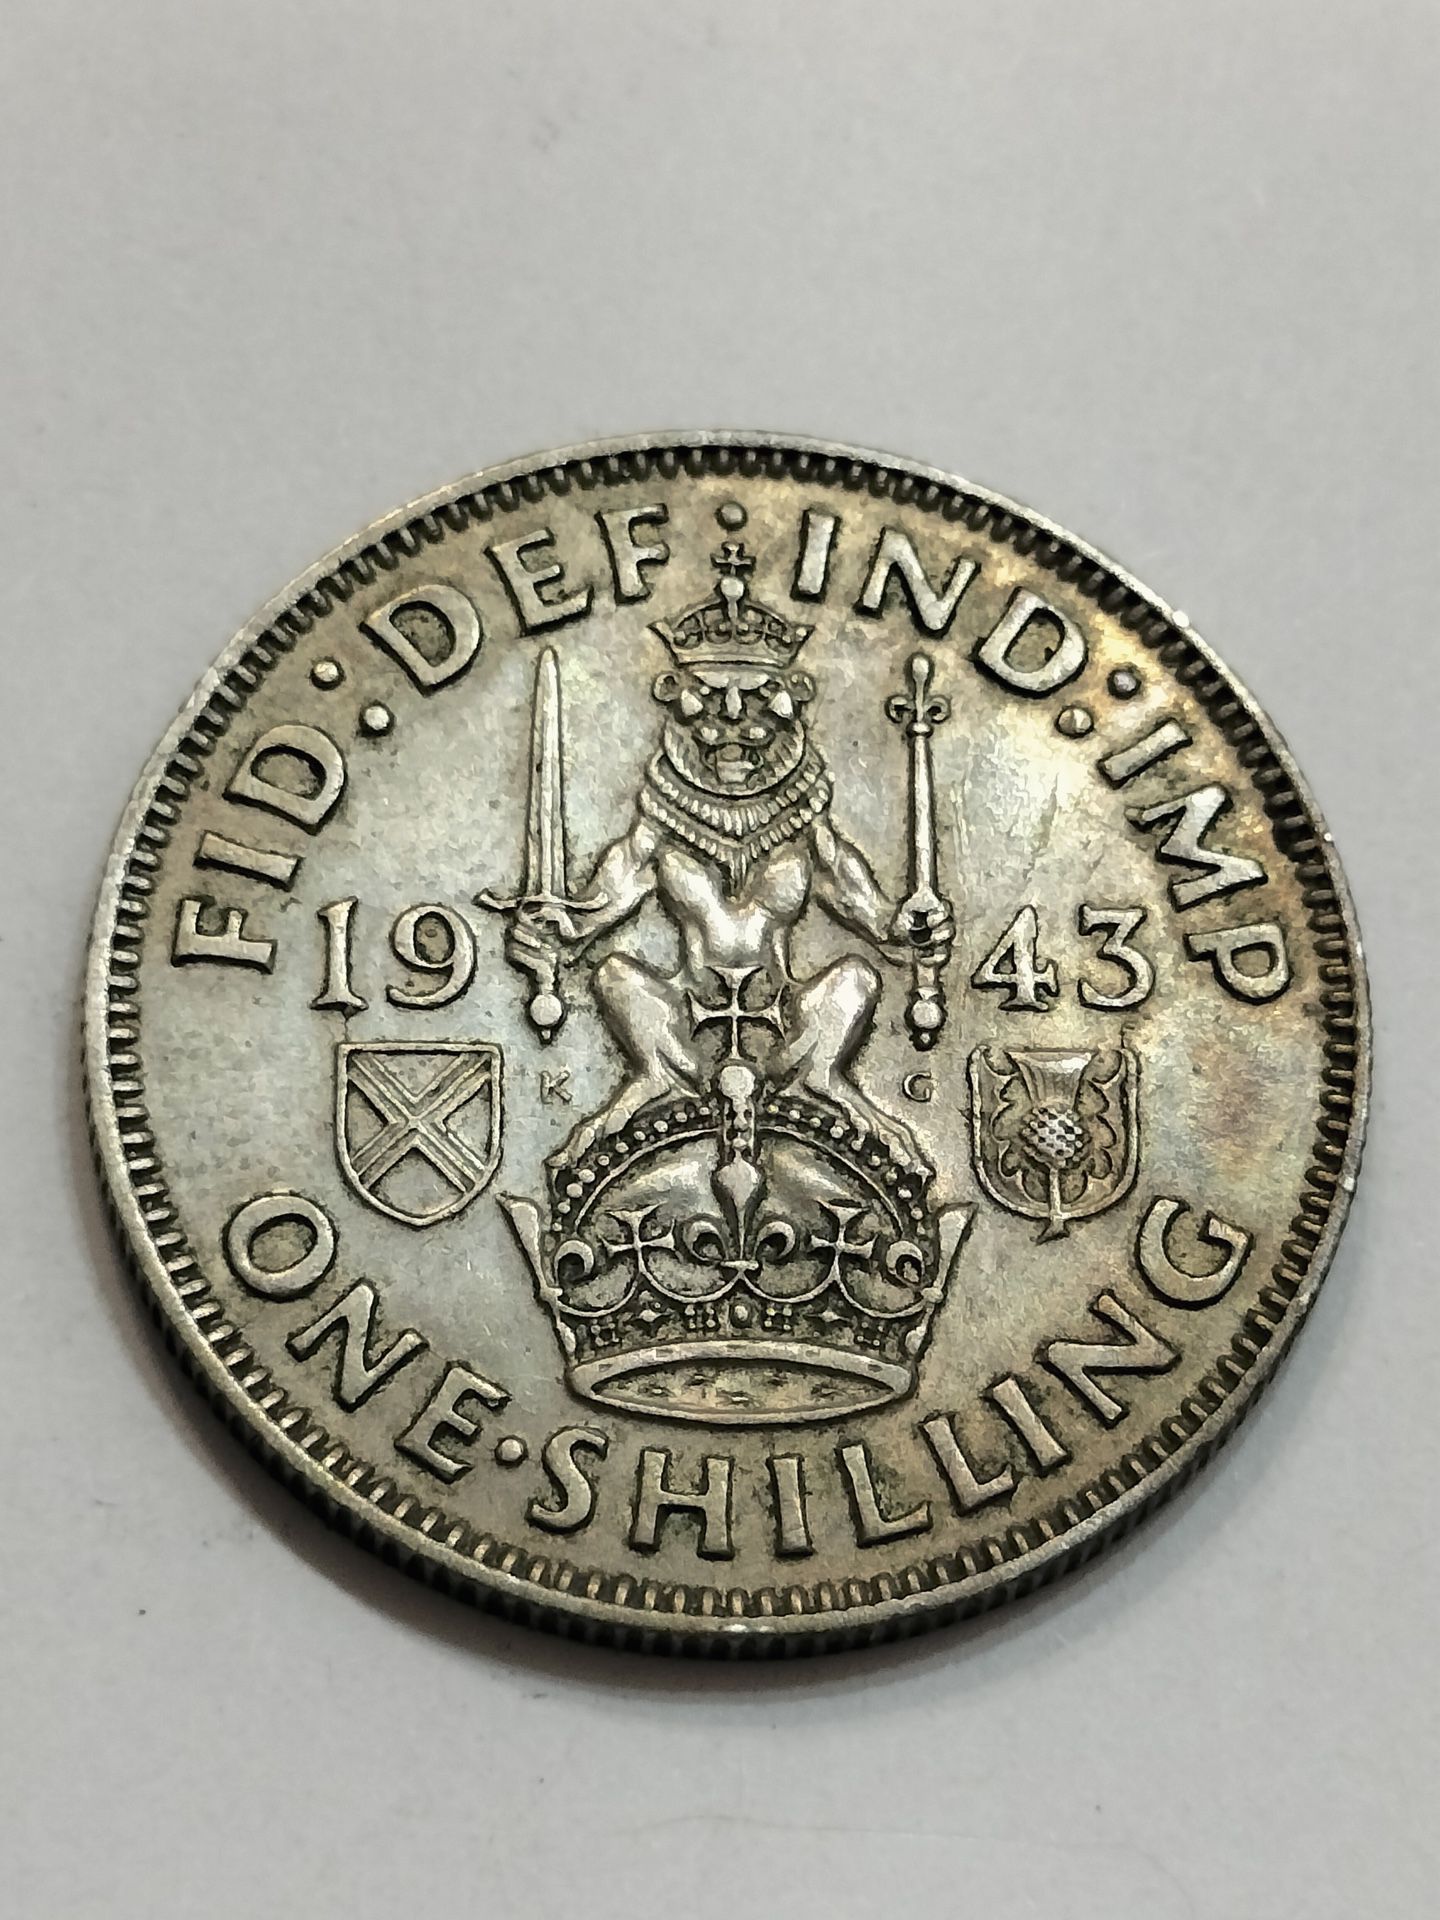 1943 One Shilling Silver Old Coin